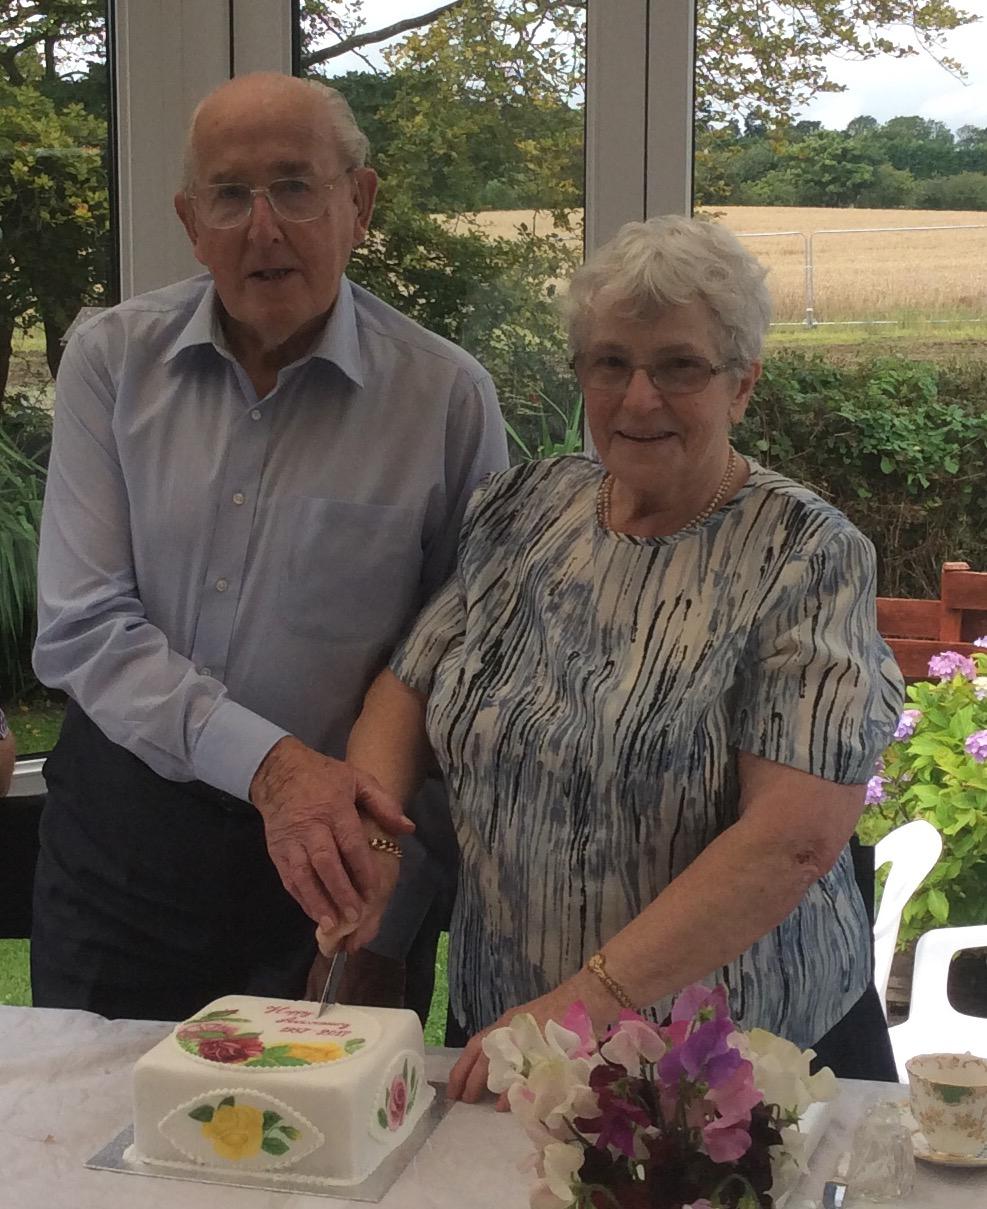 Willie and Margaret Dalgleish who farmed at Tamfourhill Falkirk and then Balgownie Mains, Culross, celebrated their diamond wedding anniversary in August, with an afternoon tea along with family and friends